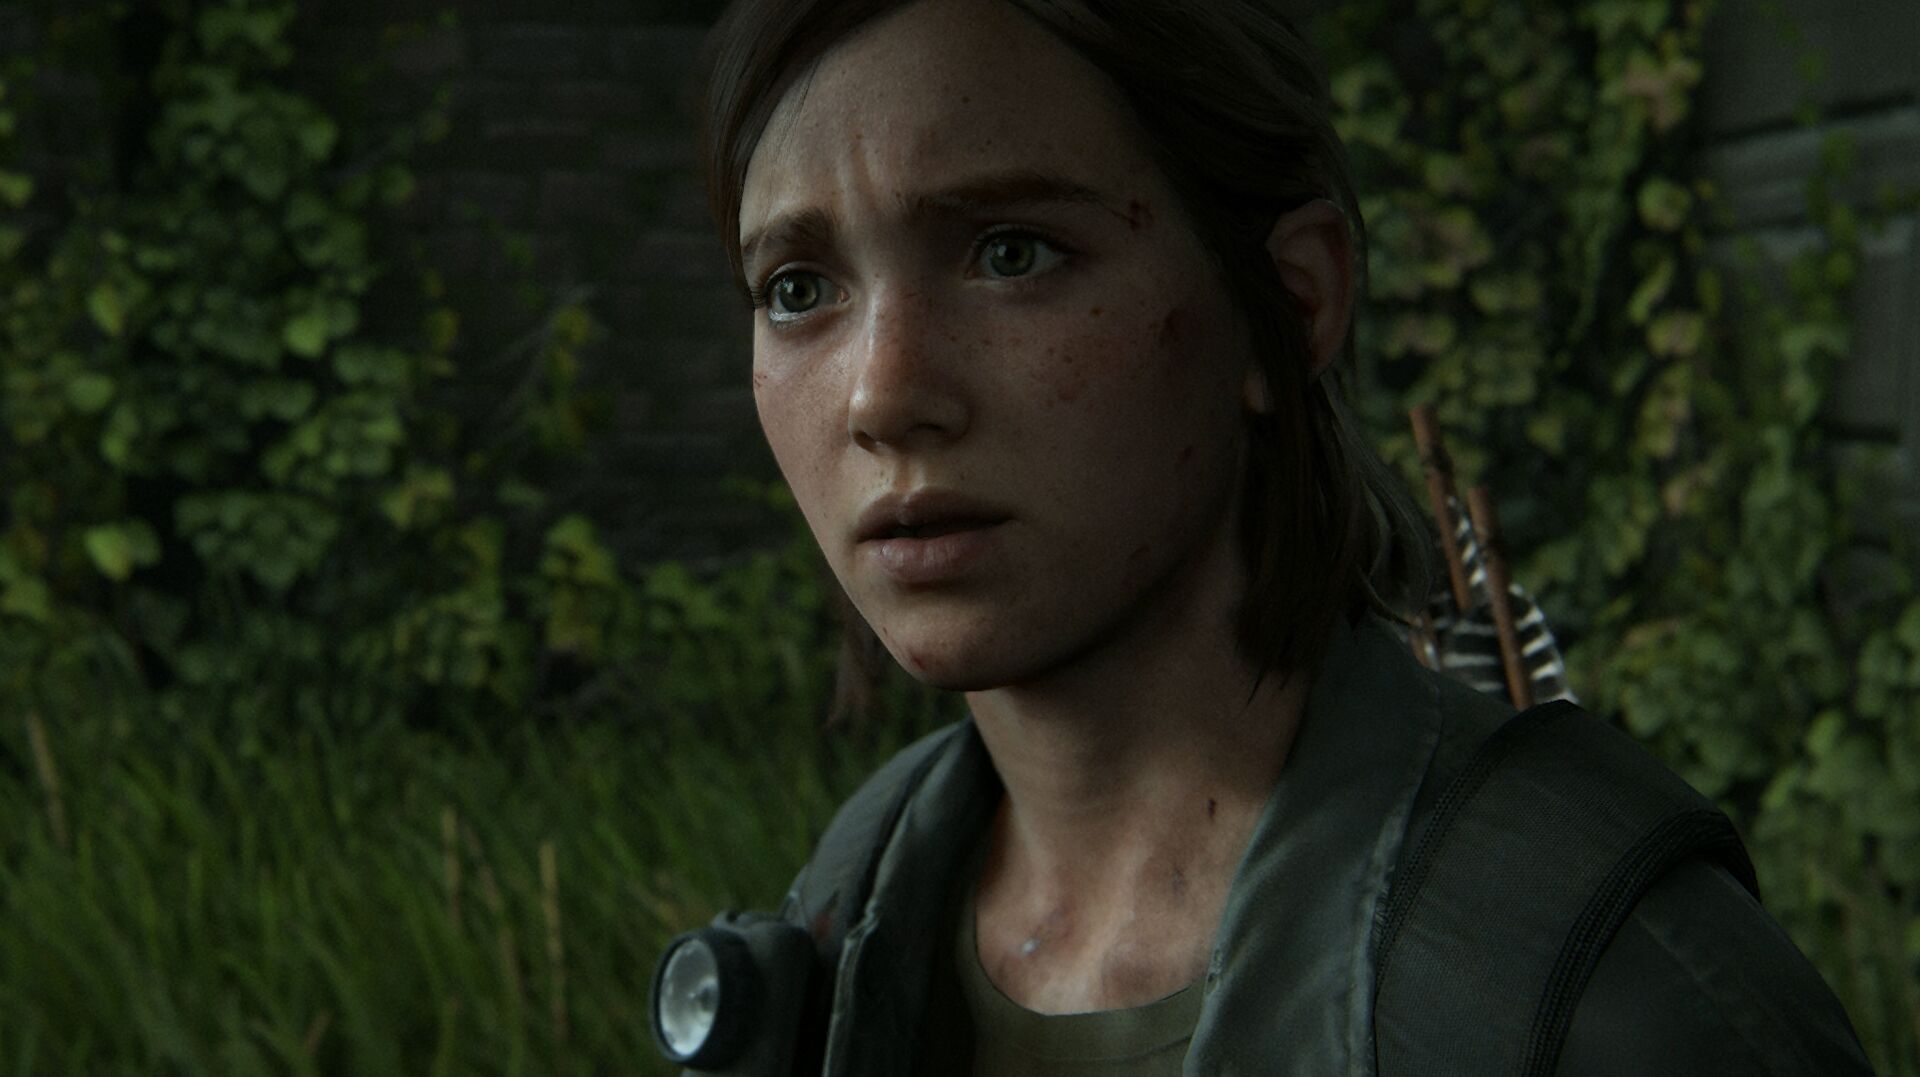 On Fridging Joels Return And Revenge A Short Chat With The Last Of Us Part 2s Writer 1569471557623